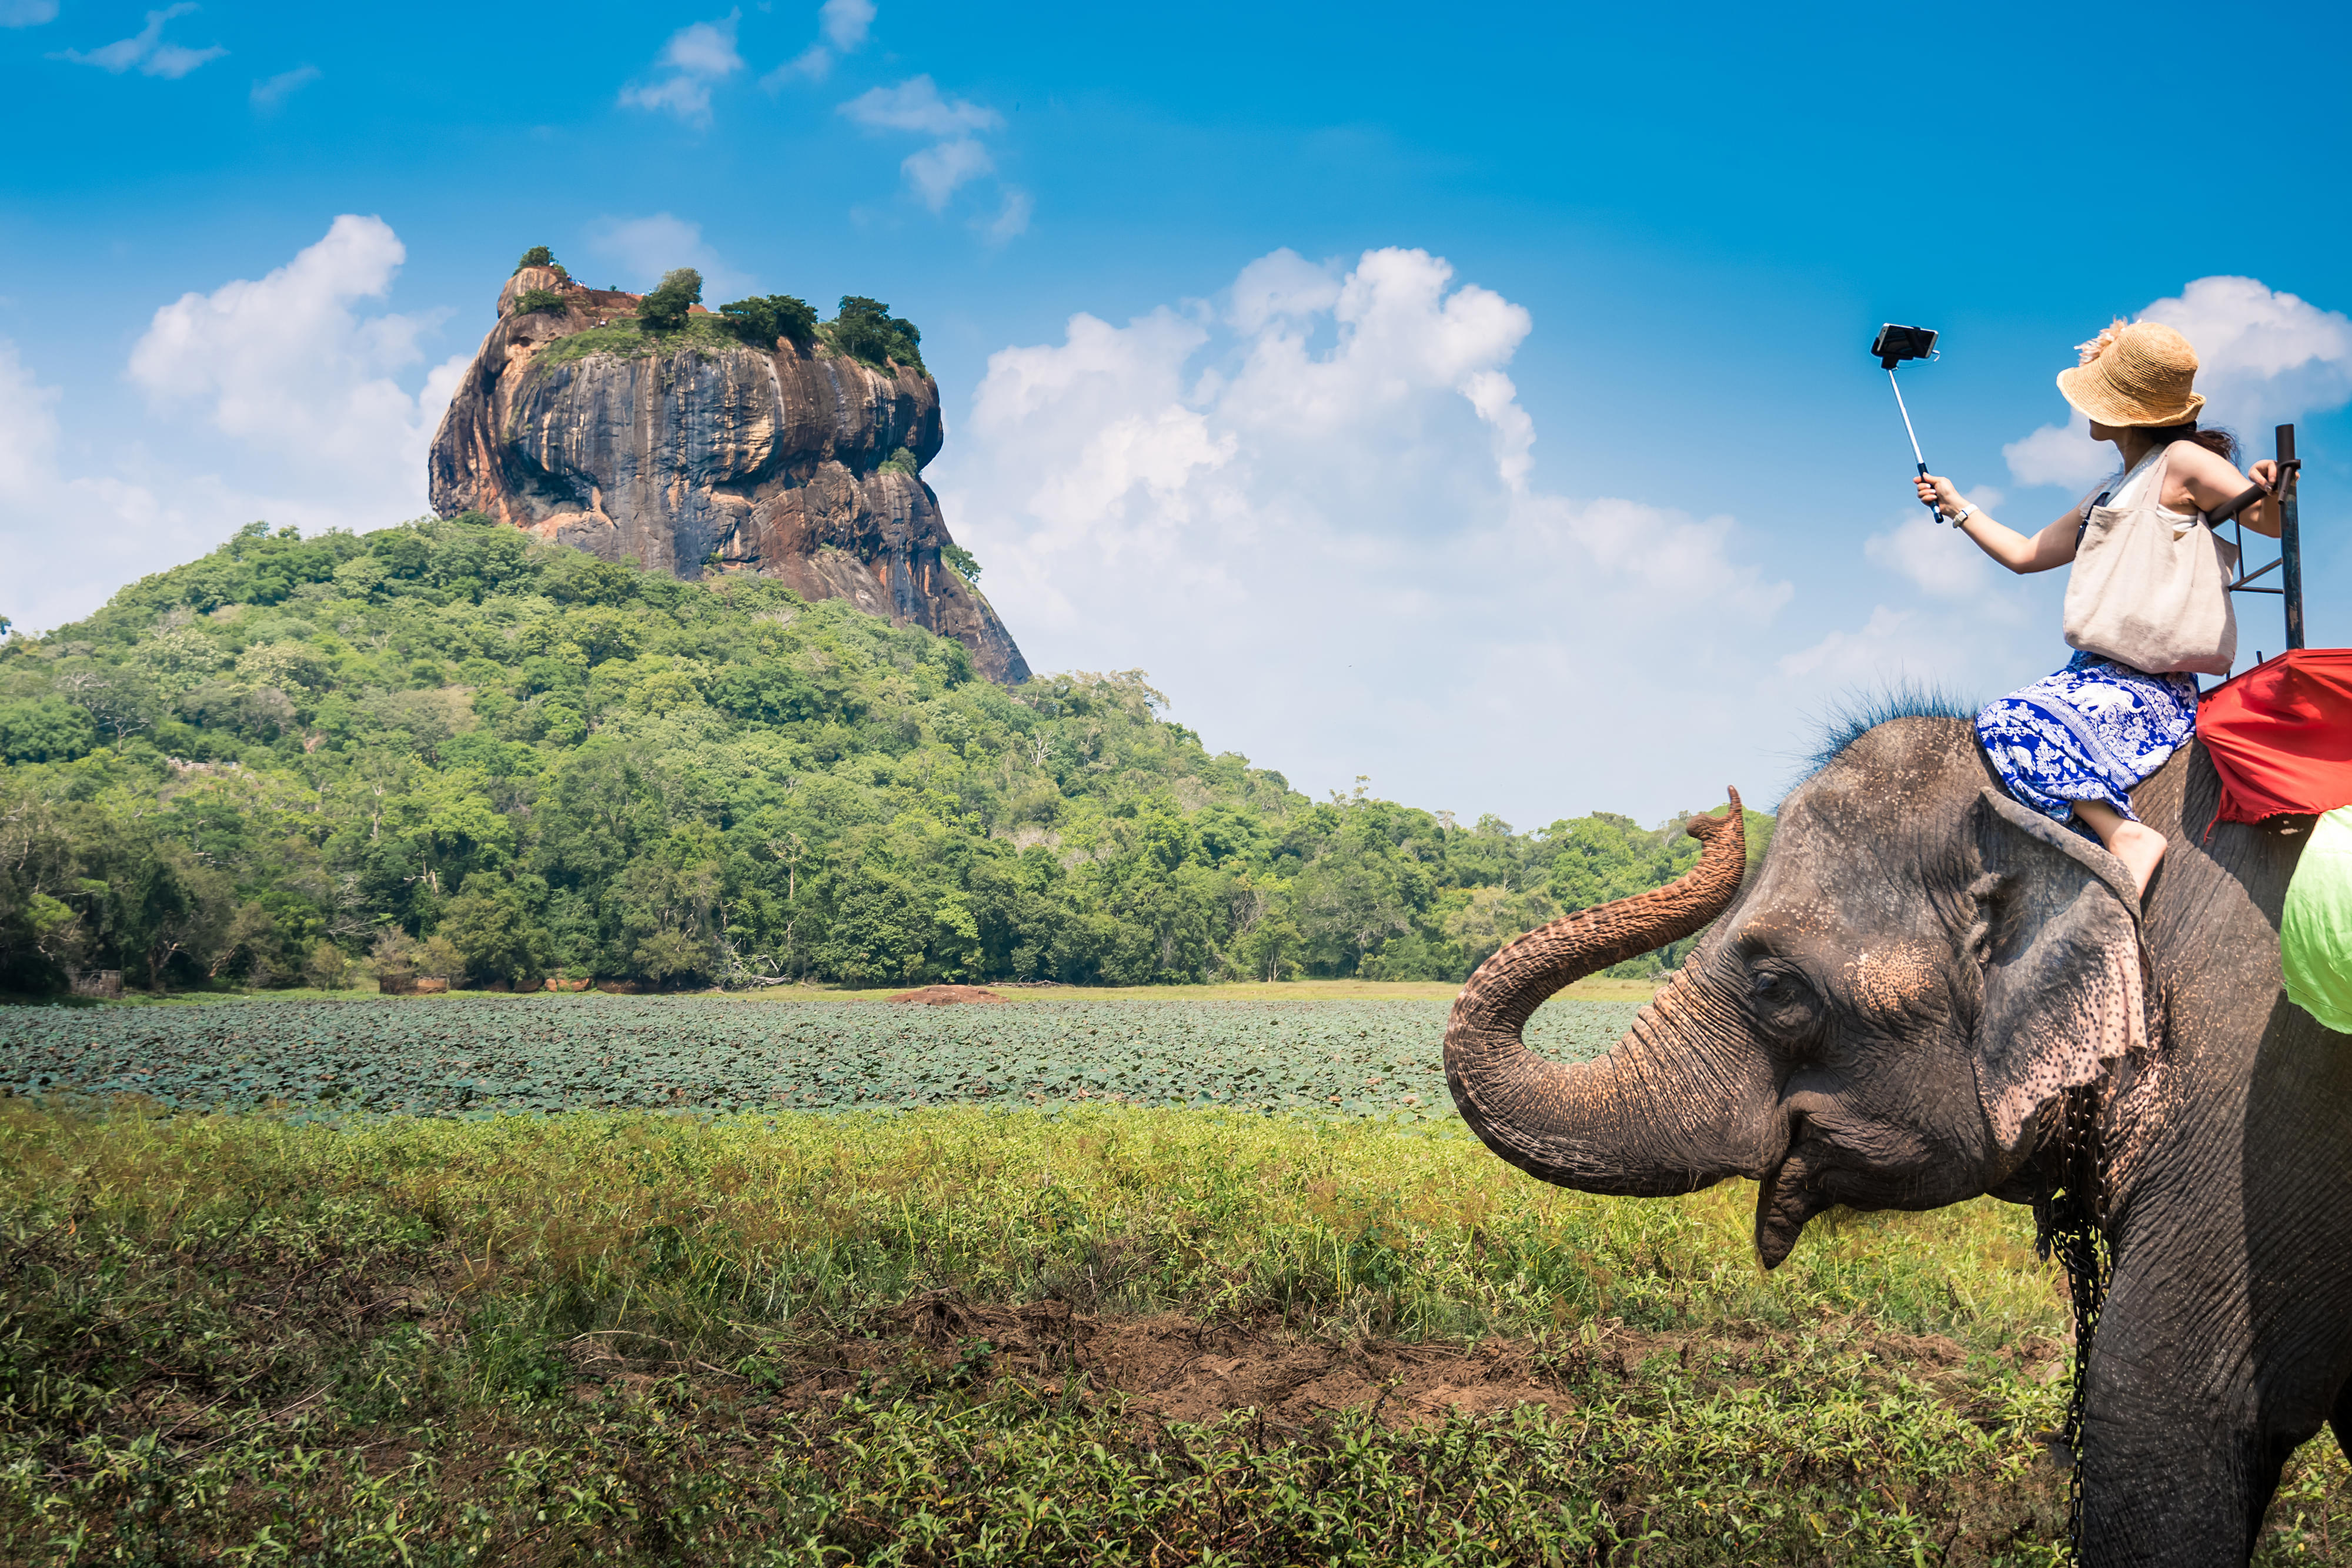 Things to Do in SriLanka